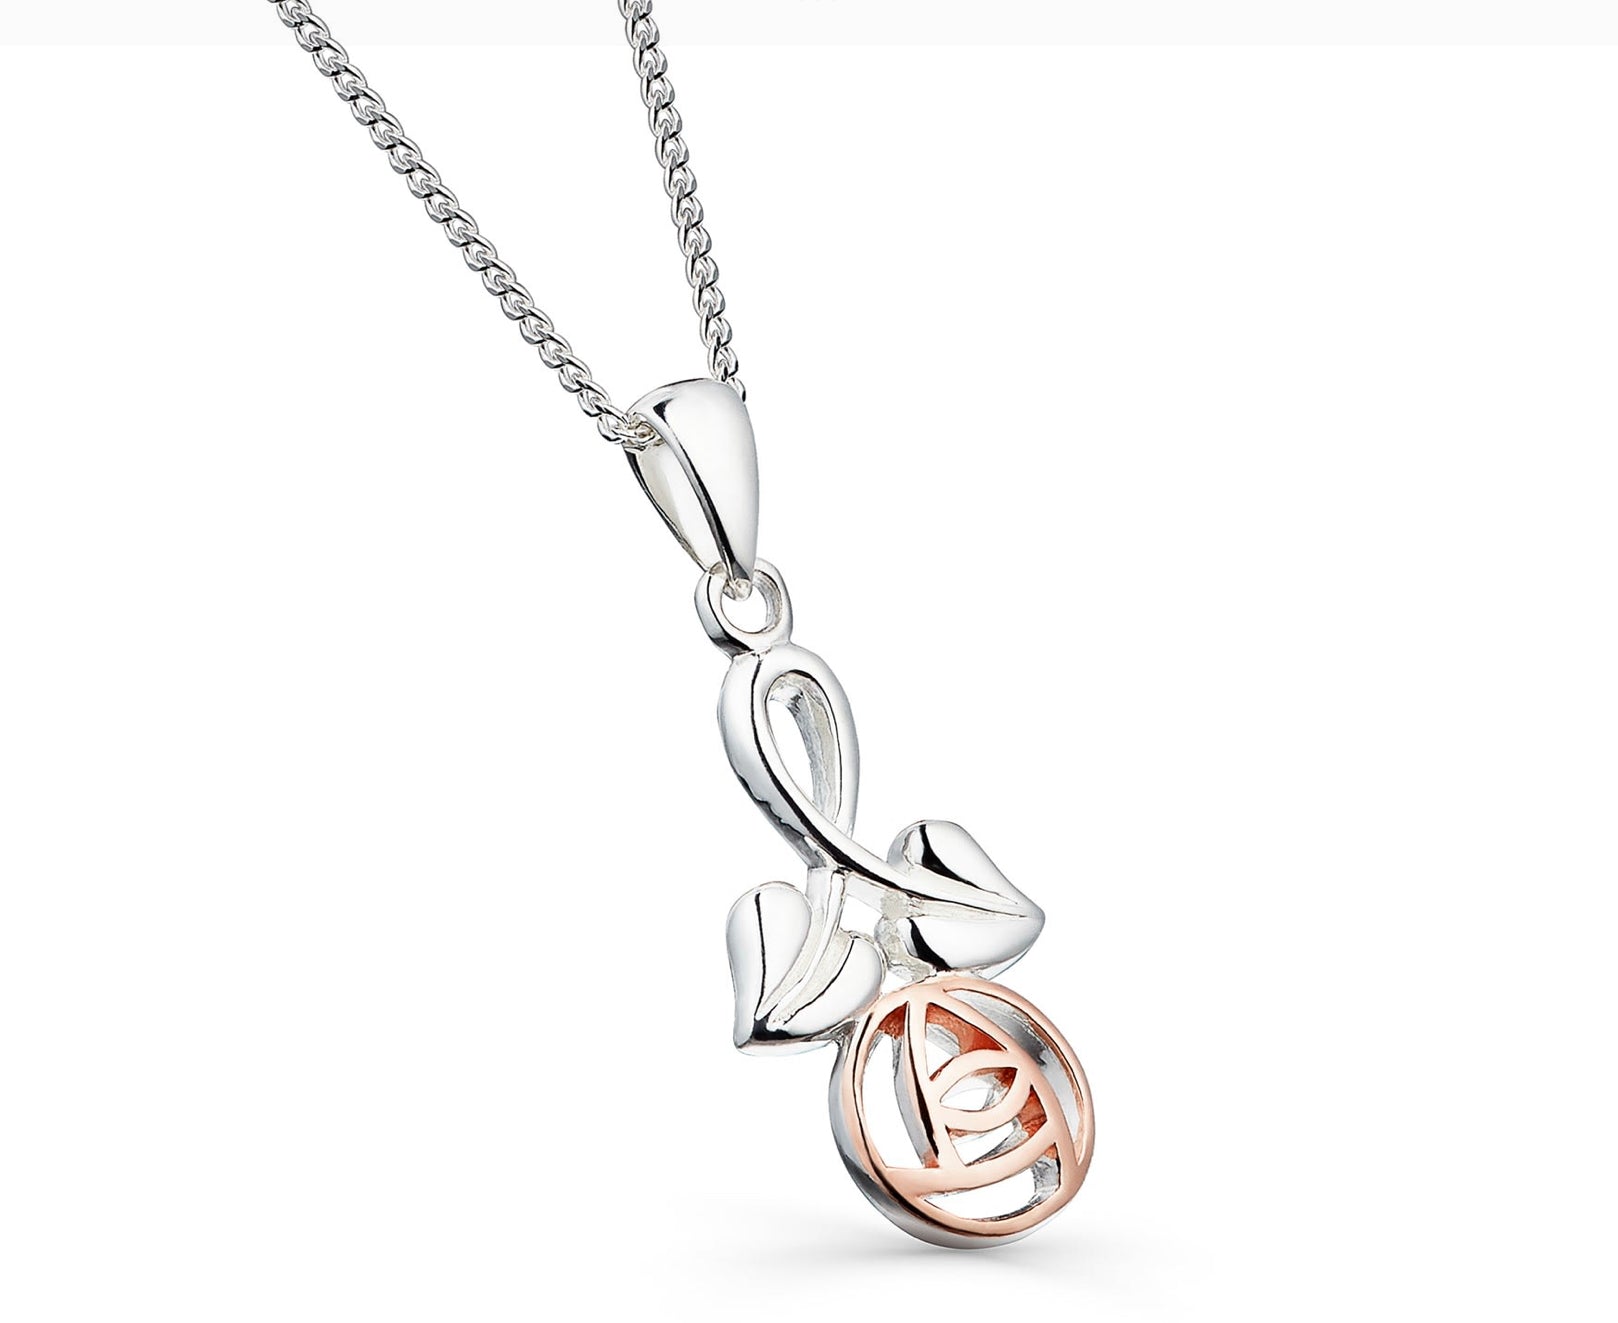 Sea Gems Rose Gold Plated Silver and Sterling Silver Mackintosh Pendant  - 6134